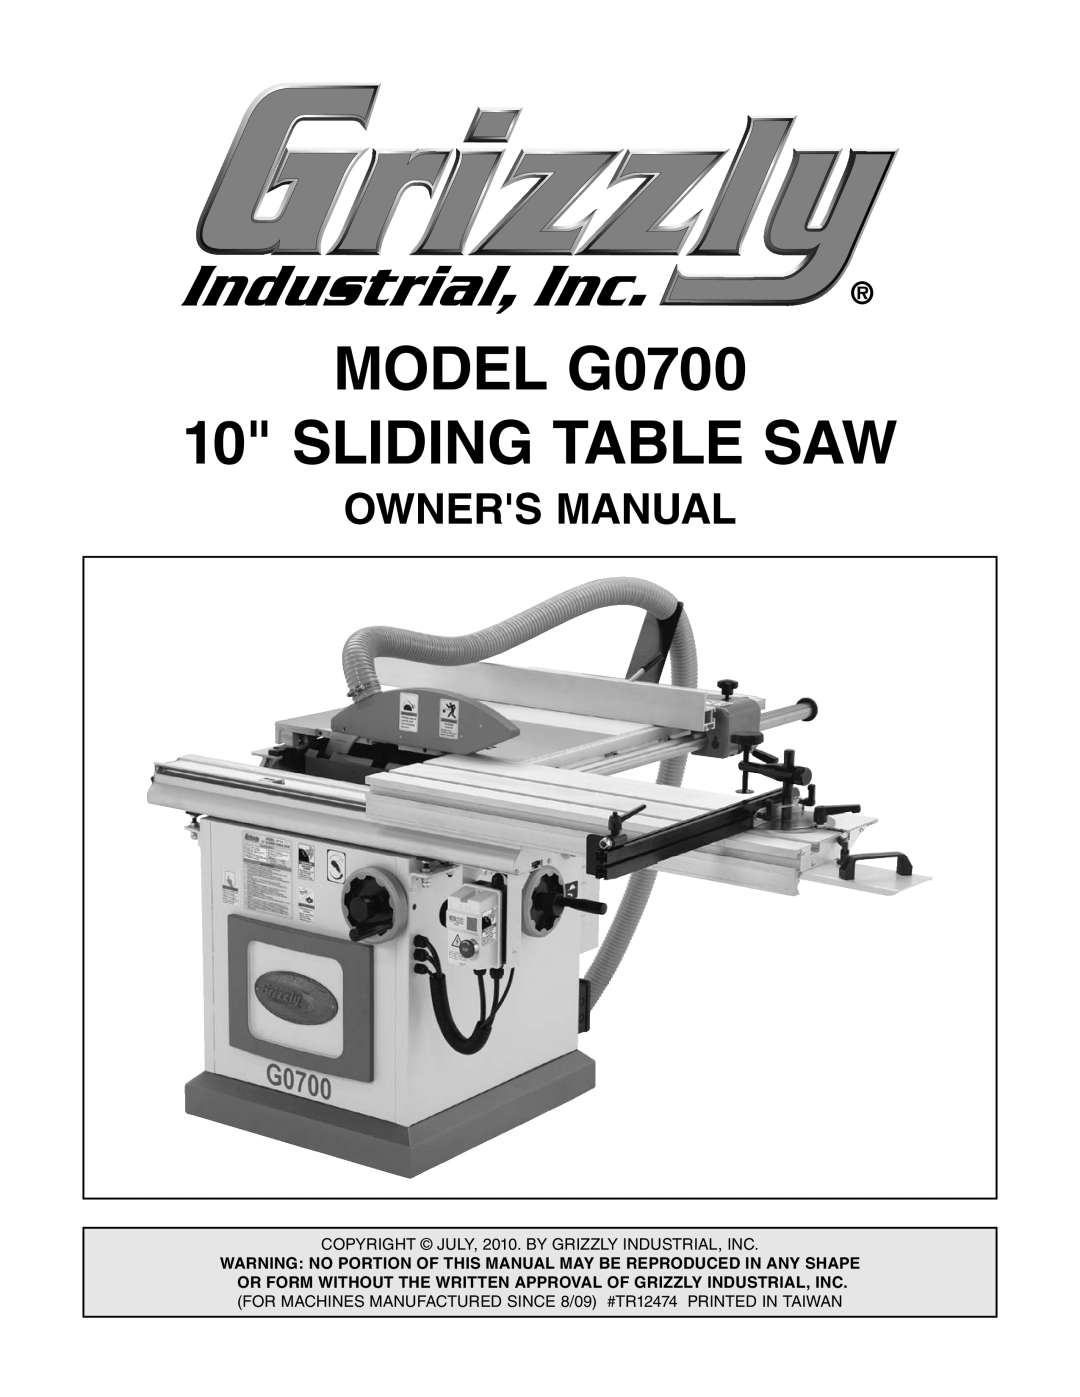 Grizzly owner manual OWNERS Manual, MODEL G0700 10 SLIDING TABLE SAW 